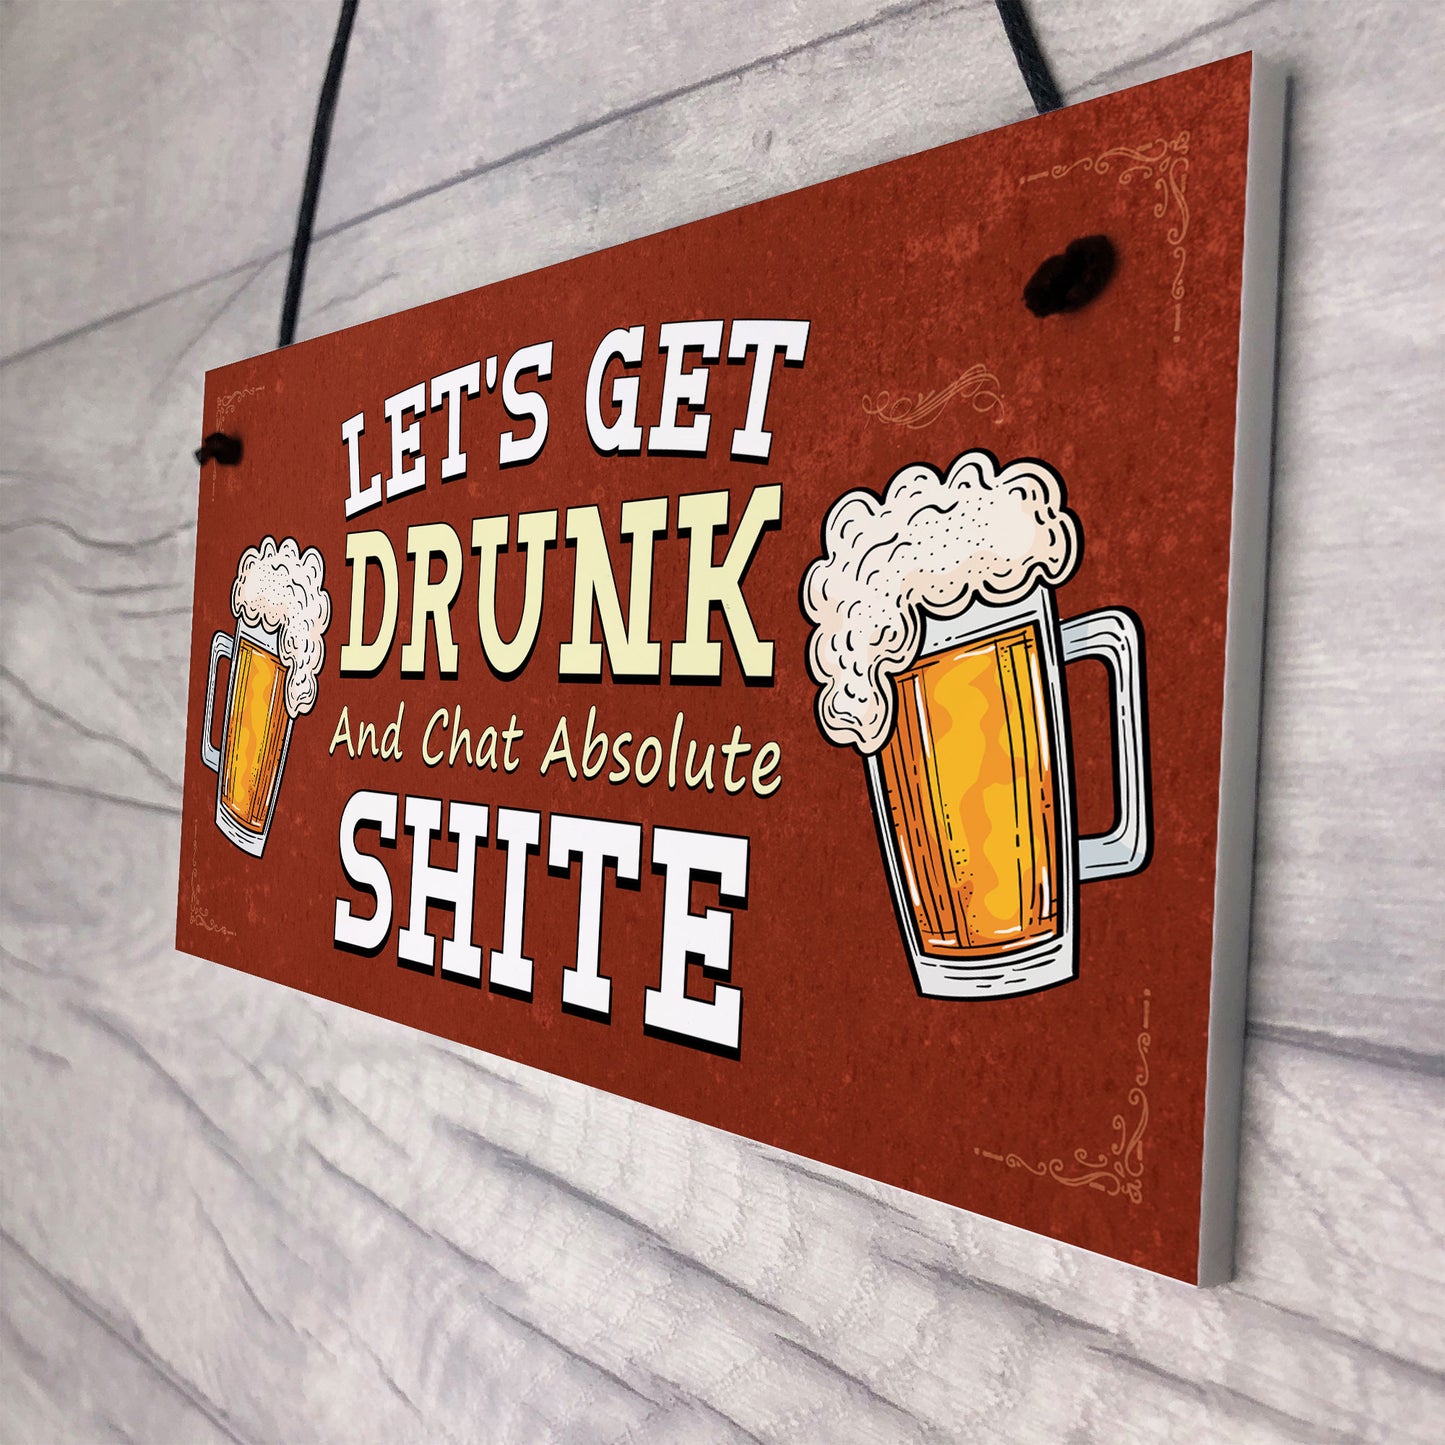 HOME BAR SIGN Hanging Wall Door Sign FUNNY Man Cave Shed Sign